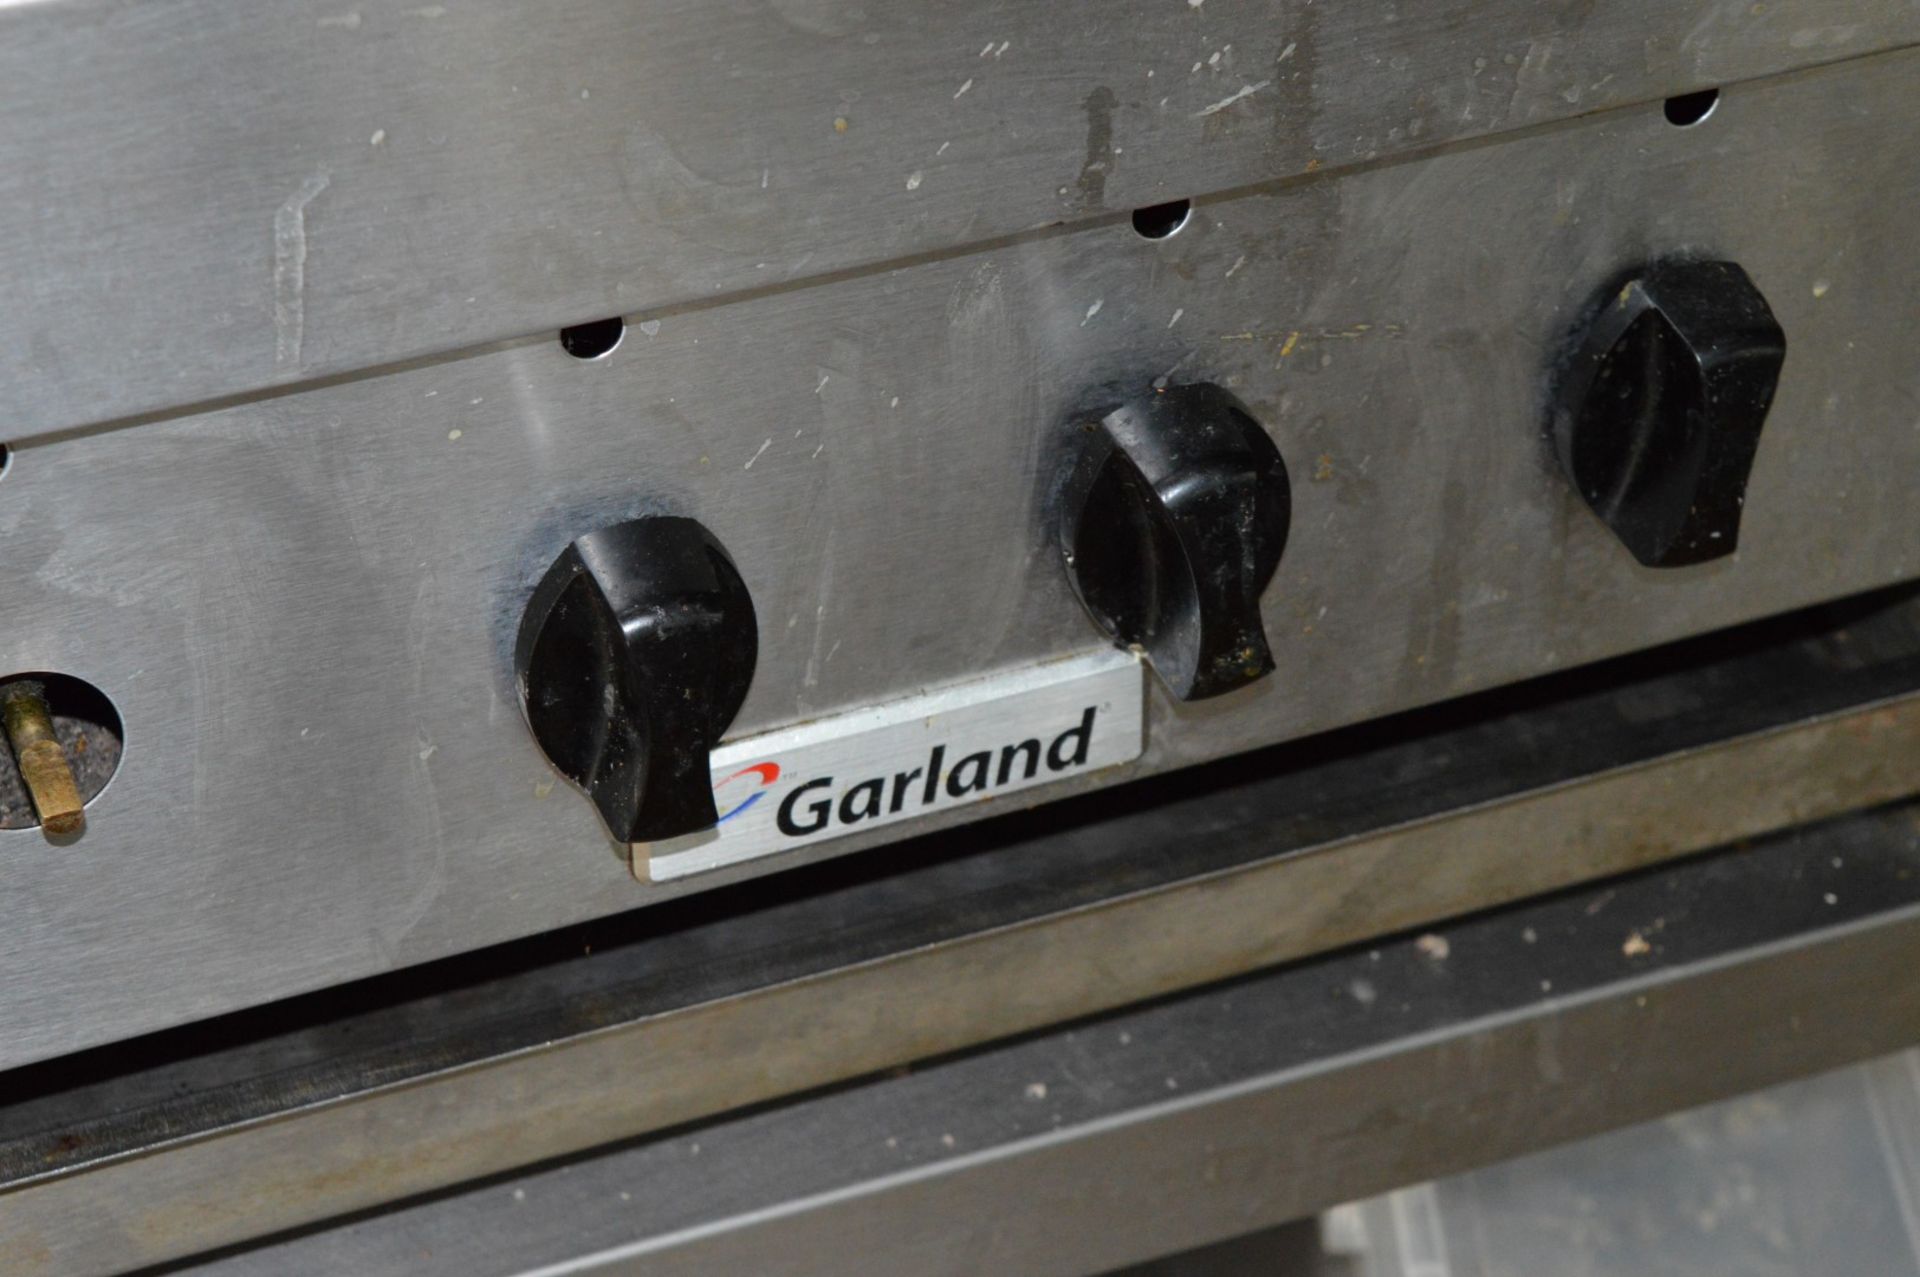 1 x Garland Stainless Steel Griddle With Stand - H91 x W85 x D75cms - CL245 - Dual Fuel Gas and - Image 3 of 8